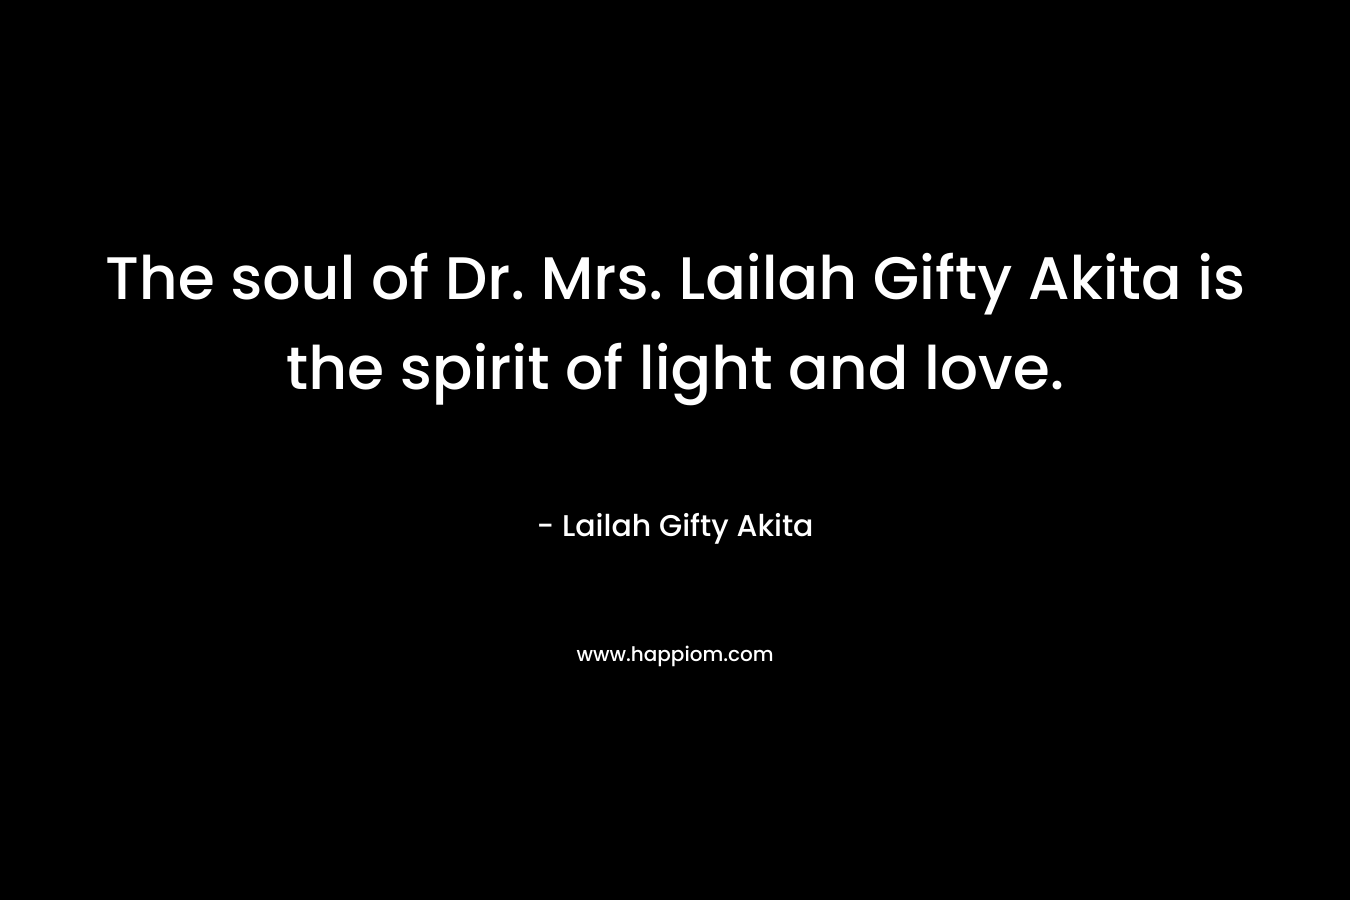 The soul of Dr. Mrs. Lailah Gifty Akita is the spirit of light and love.